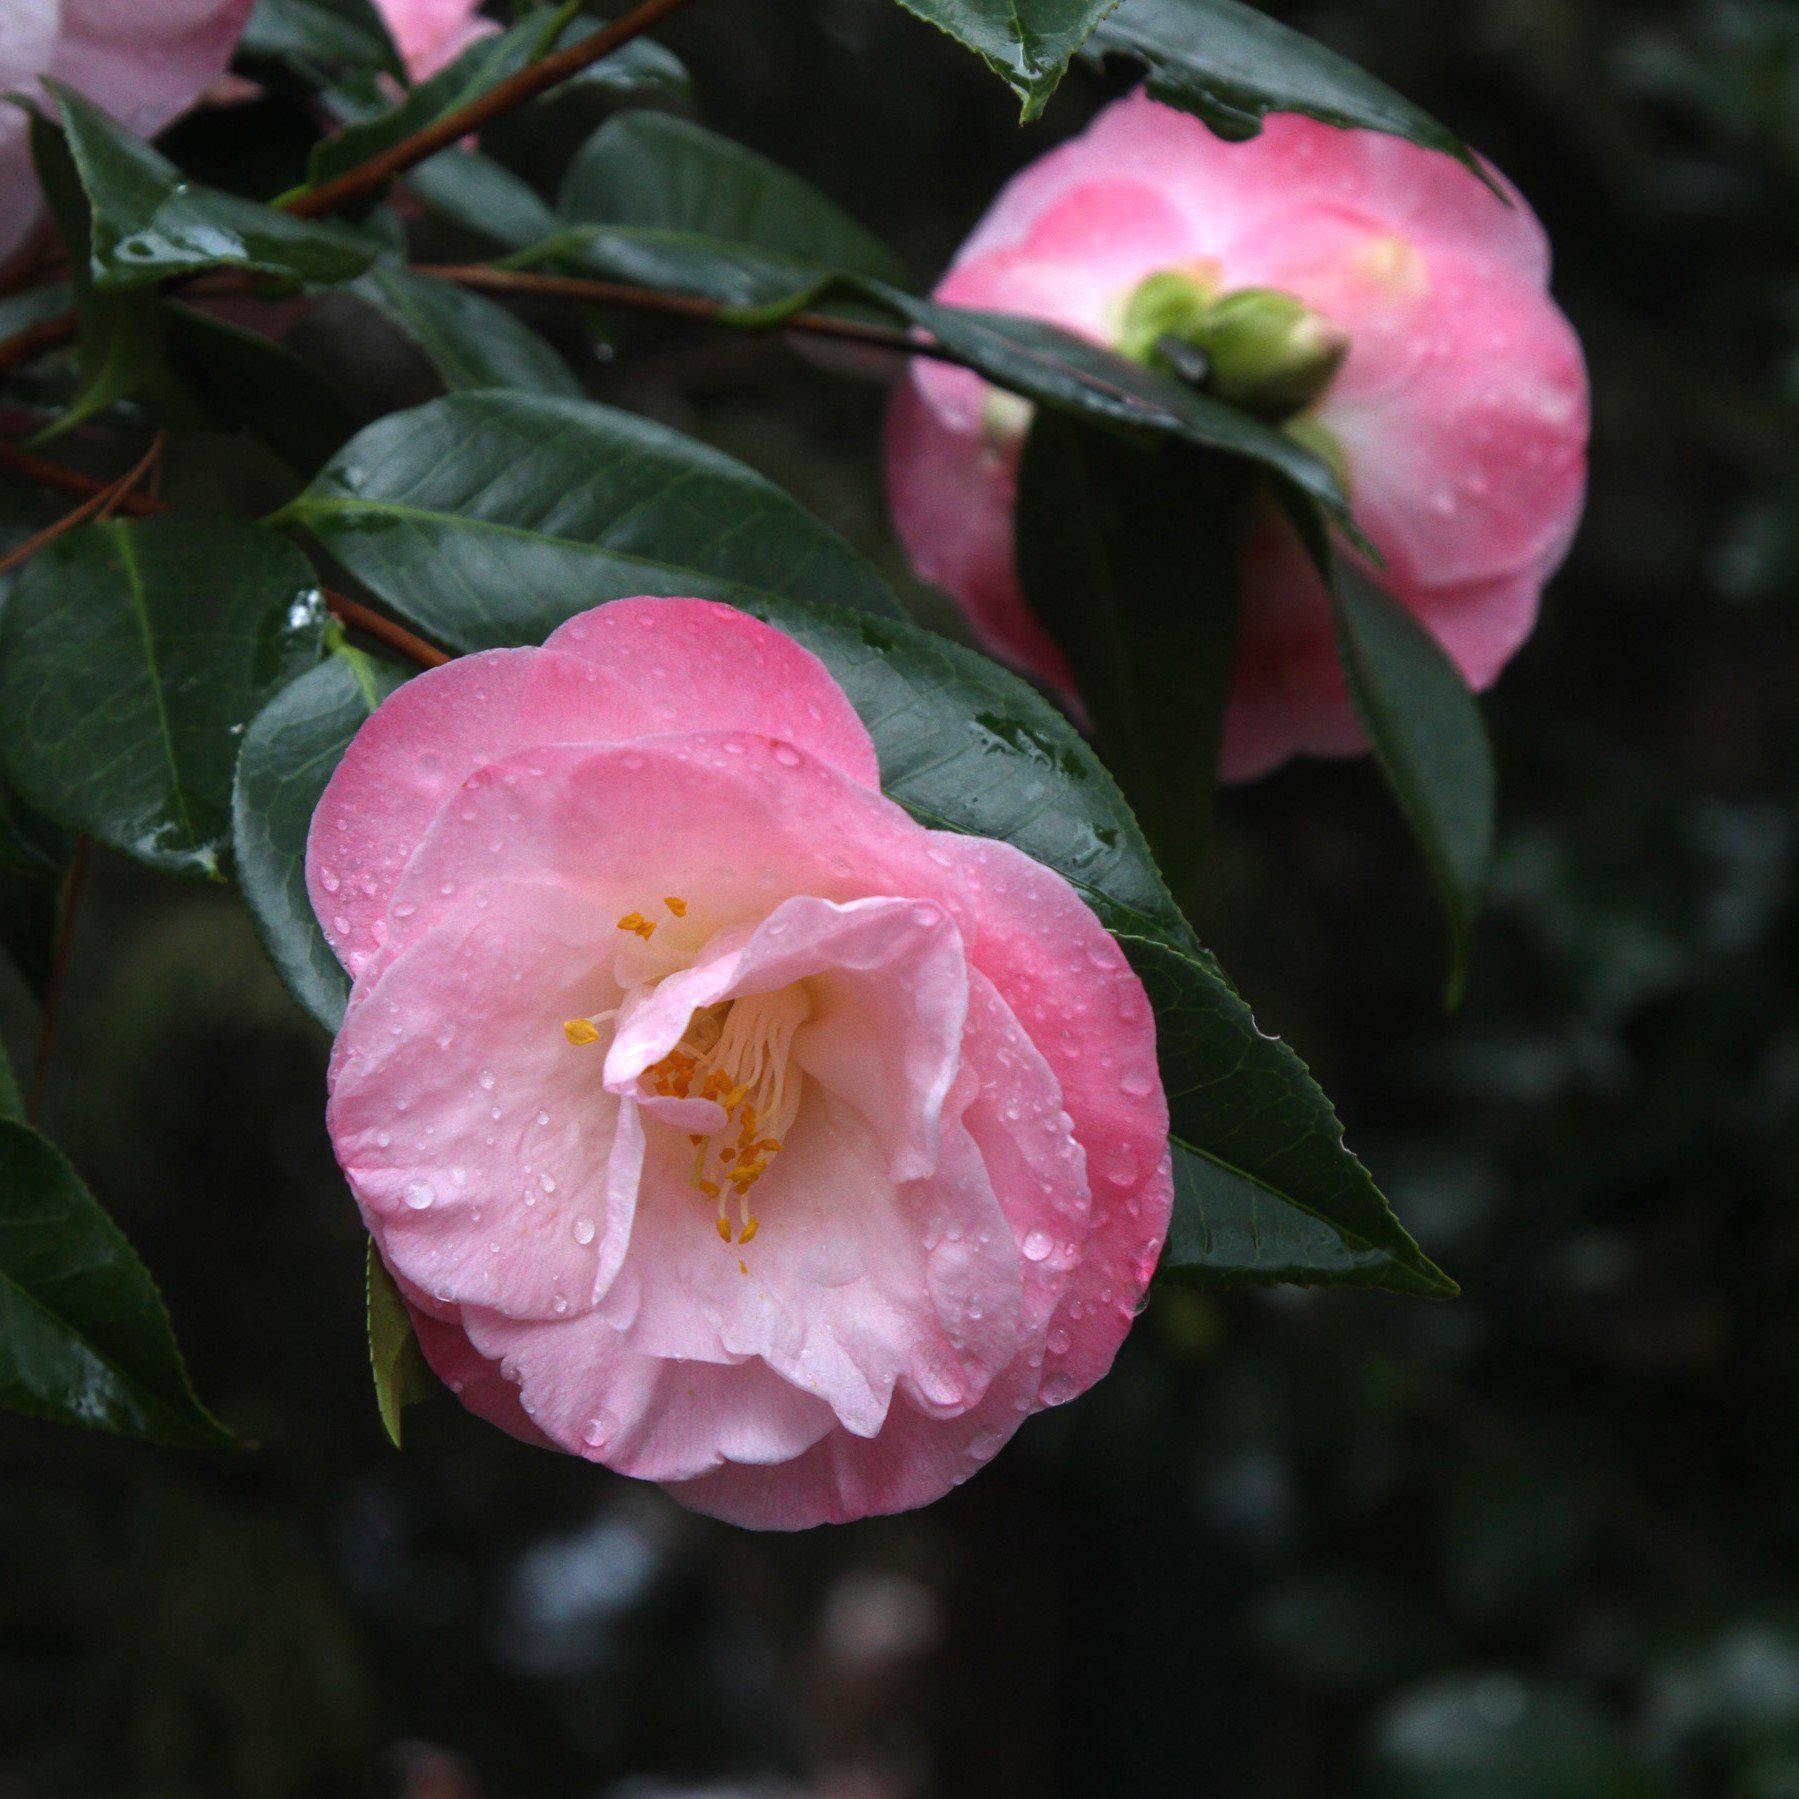 Camellia japonica 'April Remembered' ~ April Remembered Ice Angels® Camellia